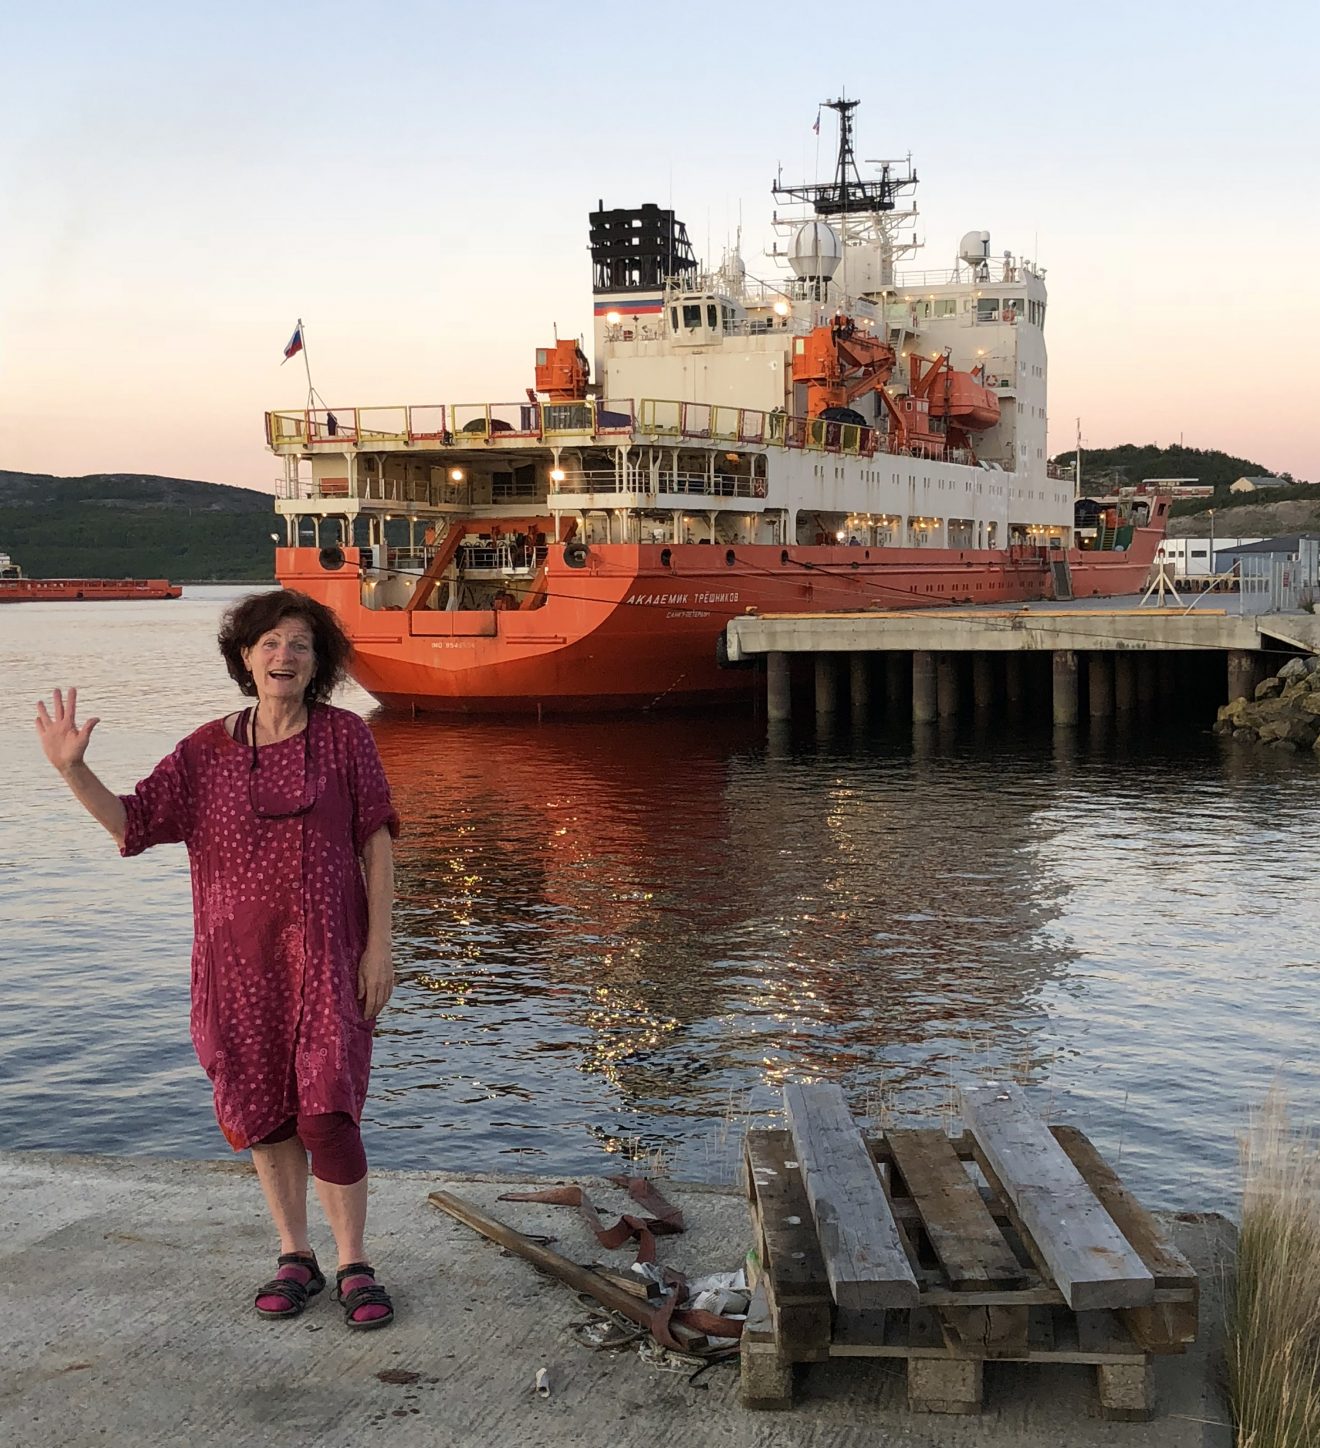 Photo courtesy of Moira O'MalleyFairbanks teacher Moira O'Malley poses in front of the Arctic research ship Akademik Tryoshnikov, which she will live on for the next 55 days.